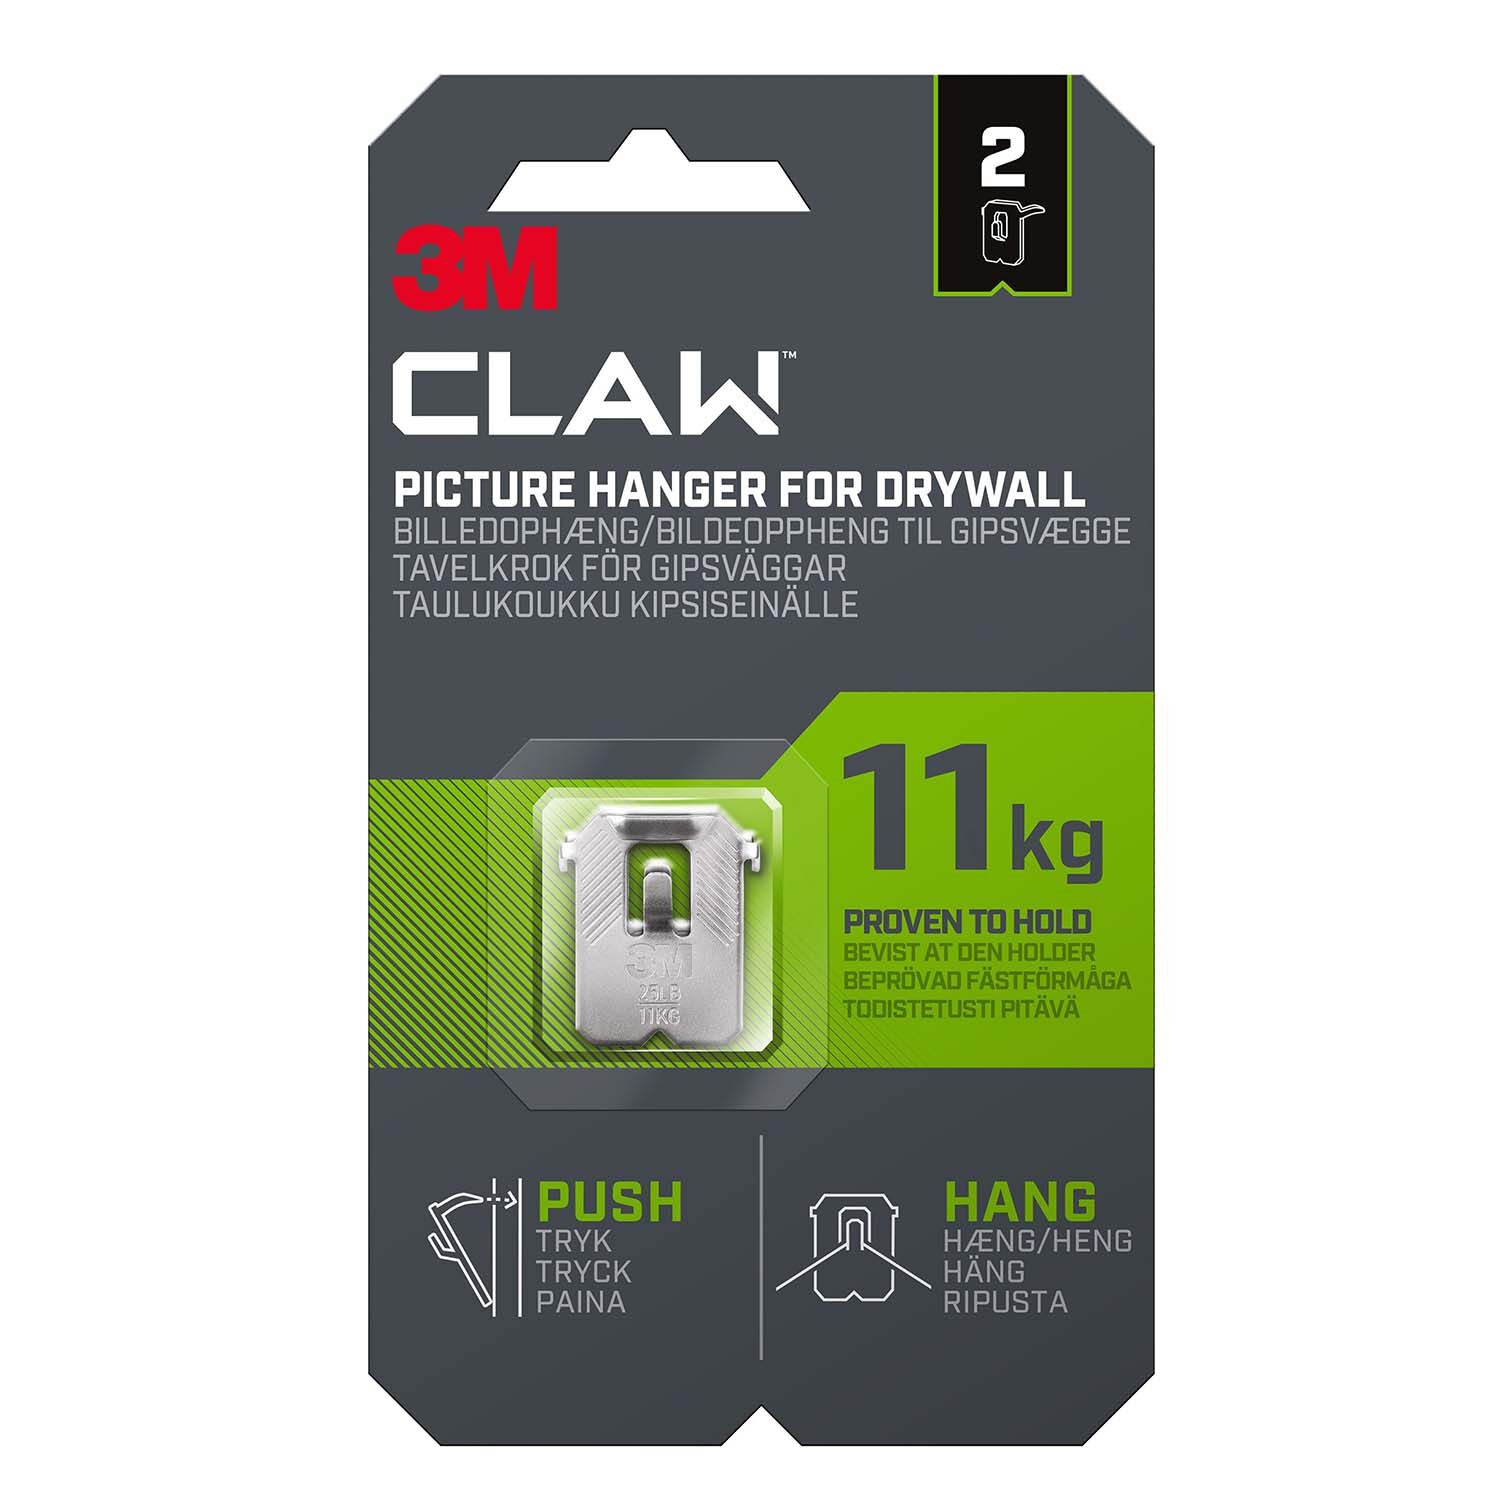 3M Claw Drywall Picture Hanger 11kg 2 Pack - Home Store + More